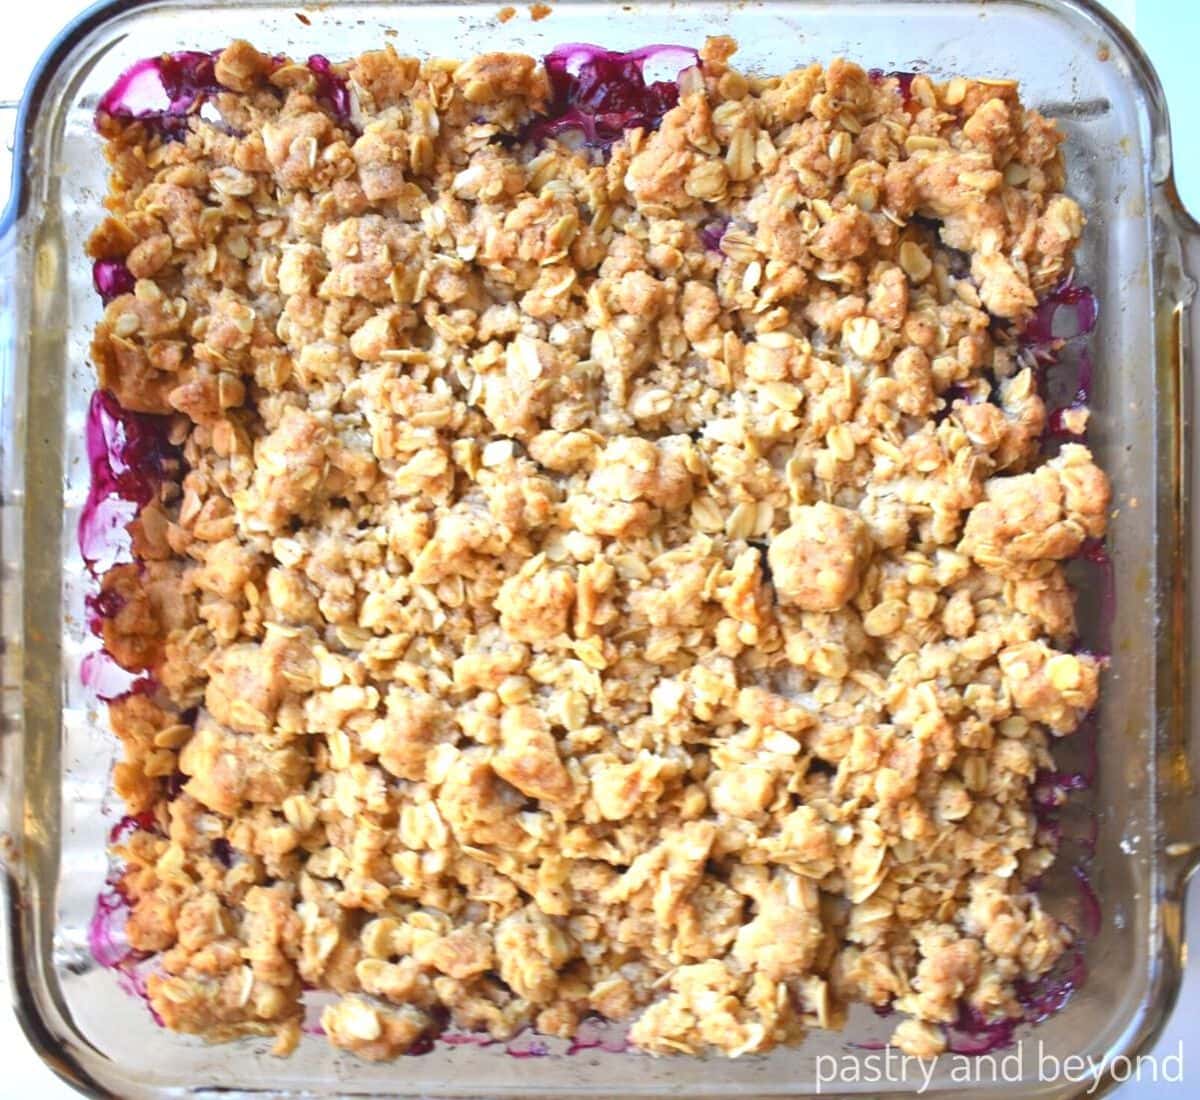 Blueberry apple crumble in a baking dish.